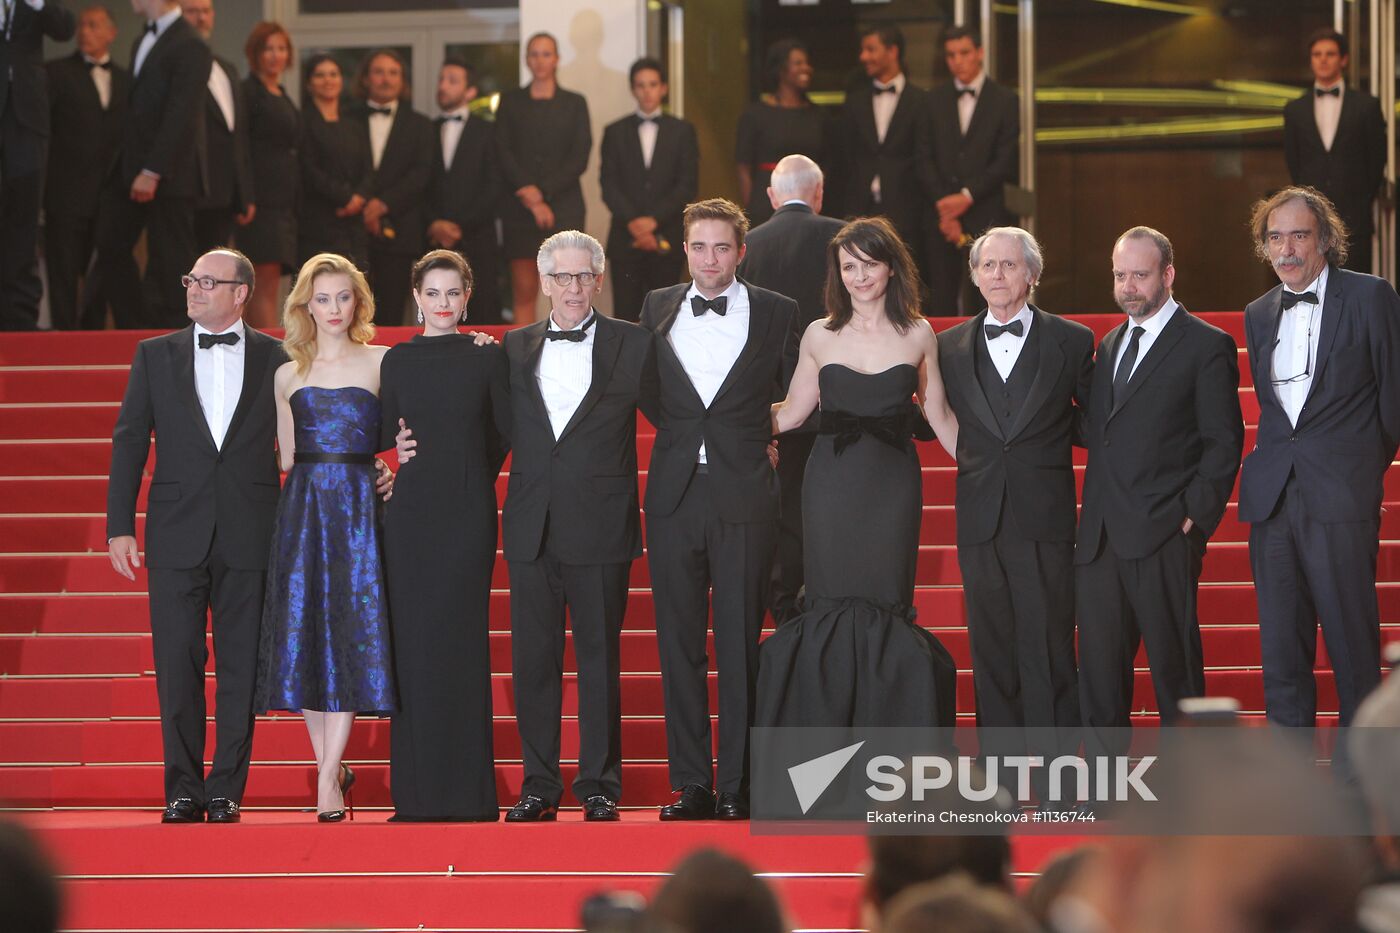 65th Cannes film festival